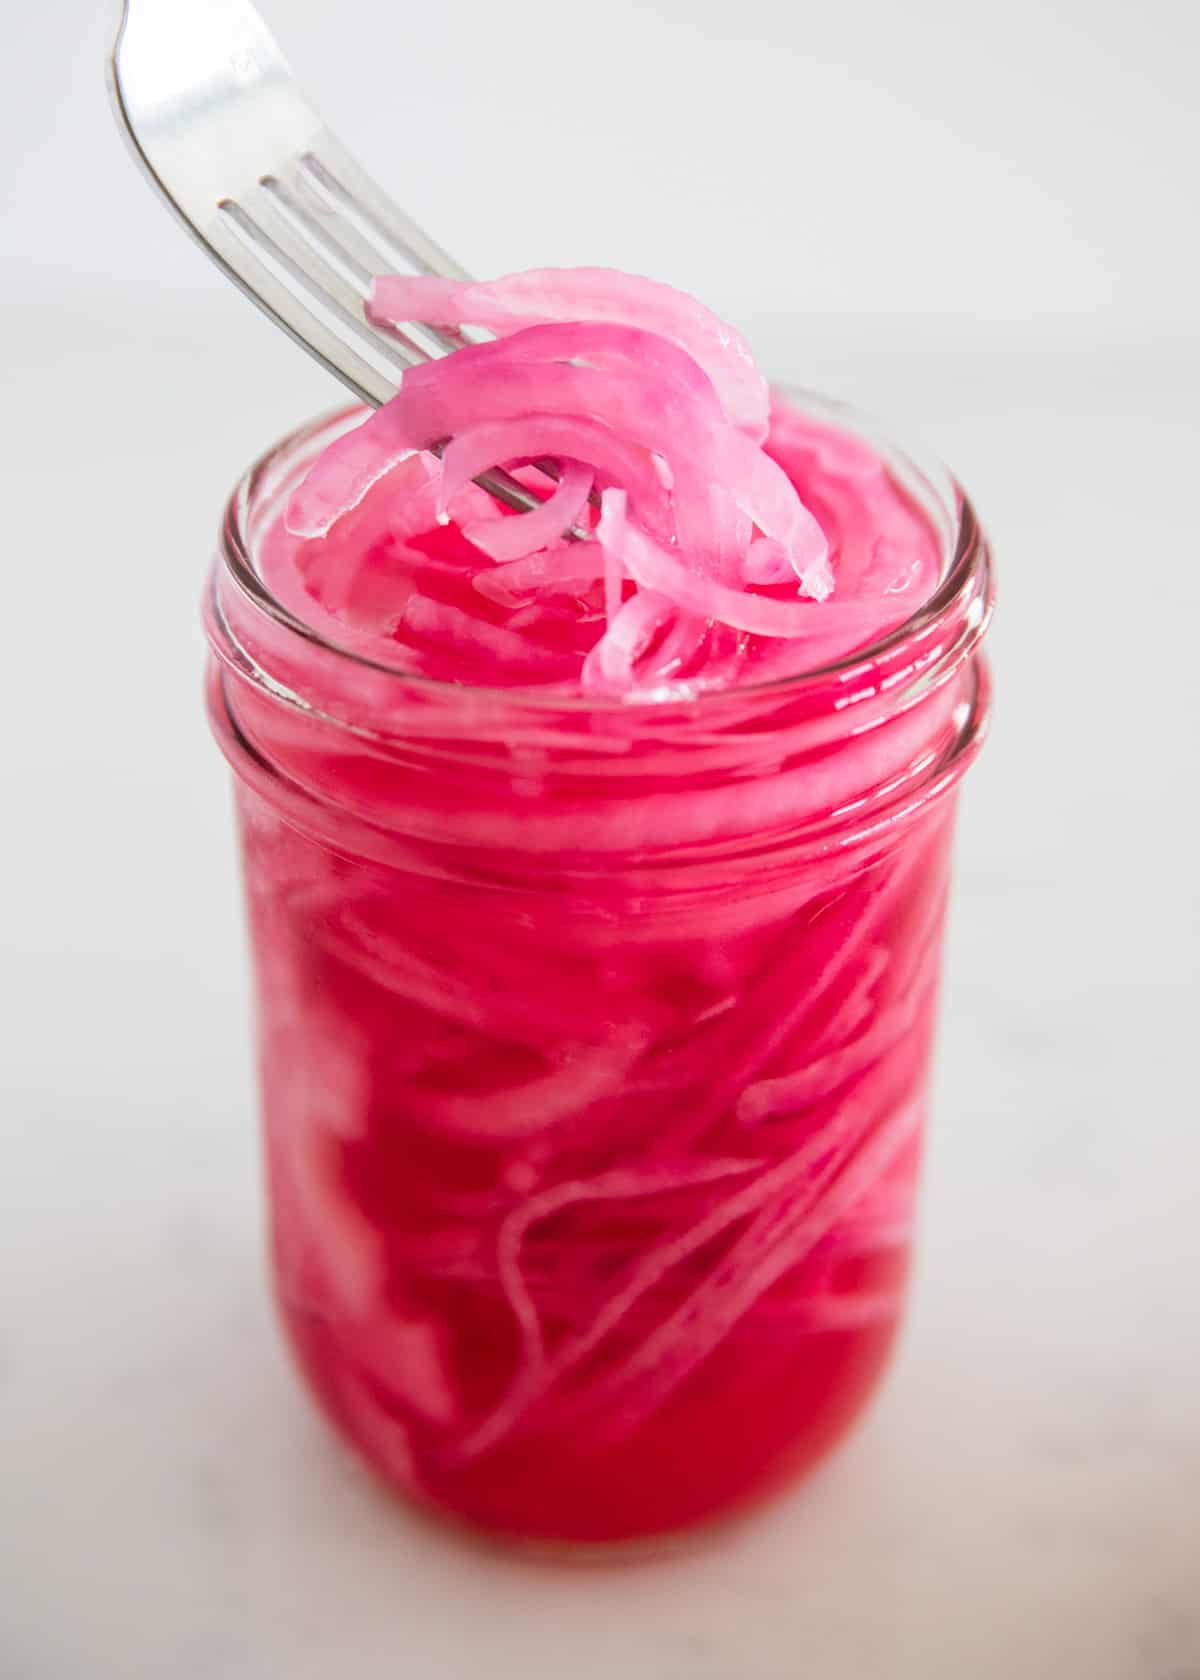 pickled onion